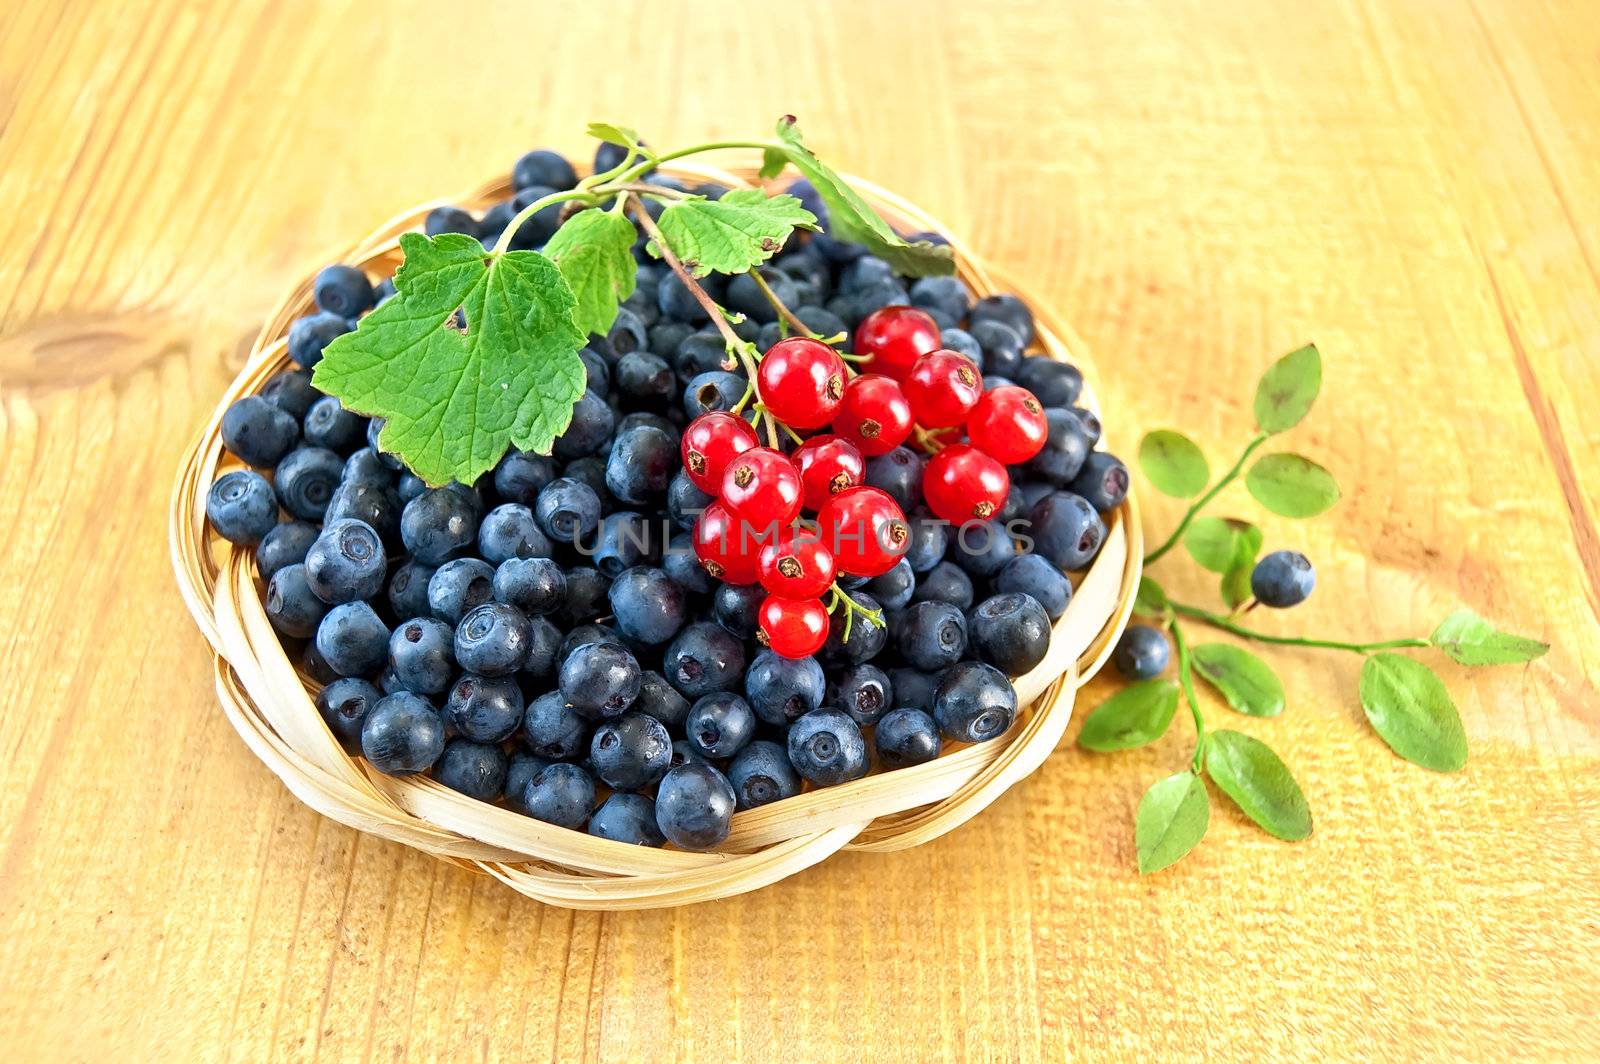 Blueberries with sprigs of red currants on the board by rezkrr